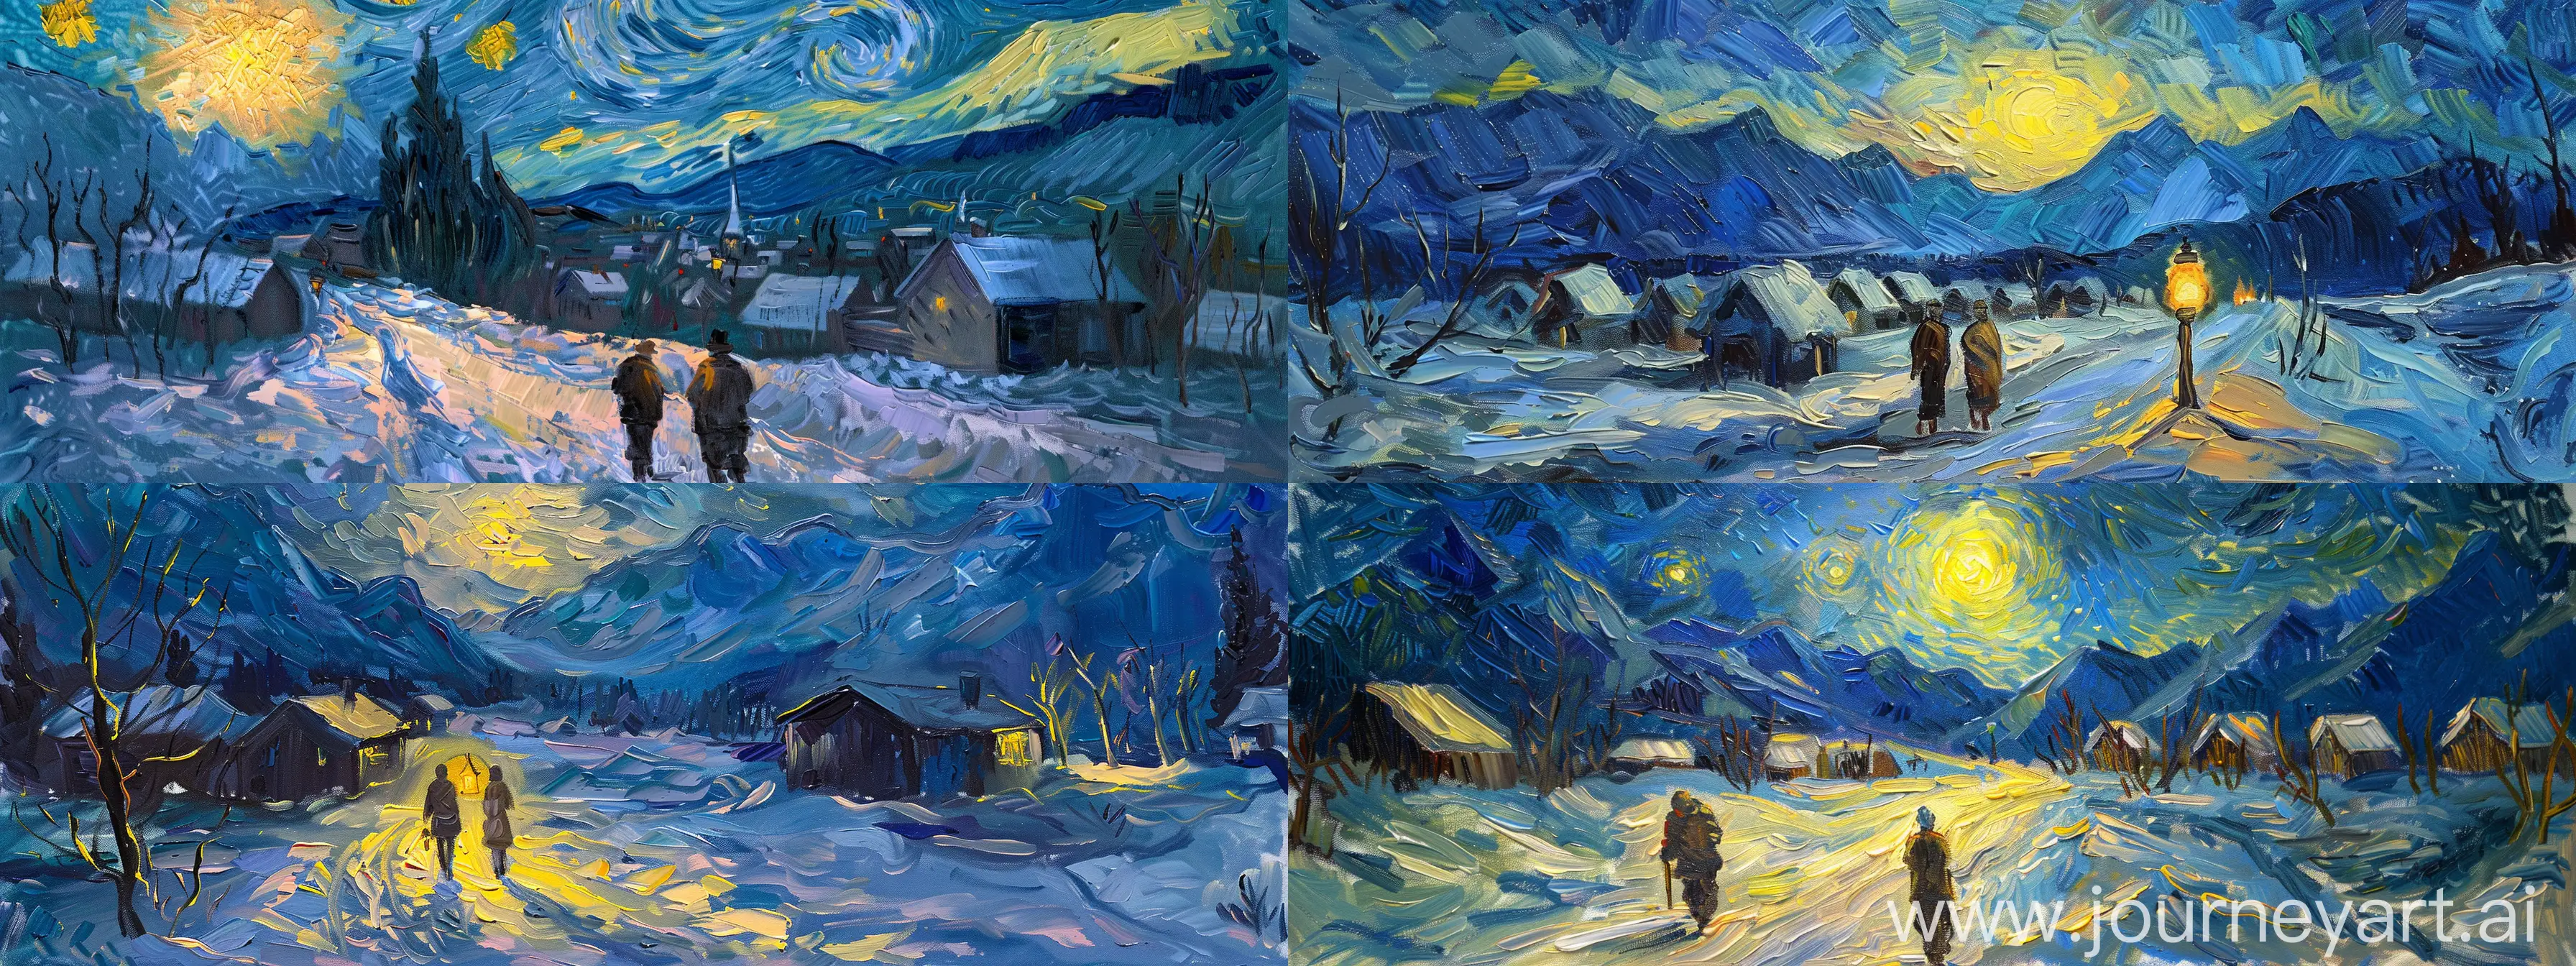 oil painting depicts a nocturnal winter scene with two figures walking down a path illuminated by a strong yellow lantern light. The composition features a snowy landscape with small houses in the middle ground and mountains in the background. The painting captures the coldness and beauty of the winter environment with dynamic colors and textures, reminiscent of the Post-Impressionist style in van gogh style --ar 16:6